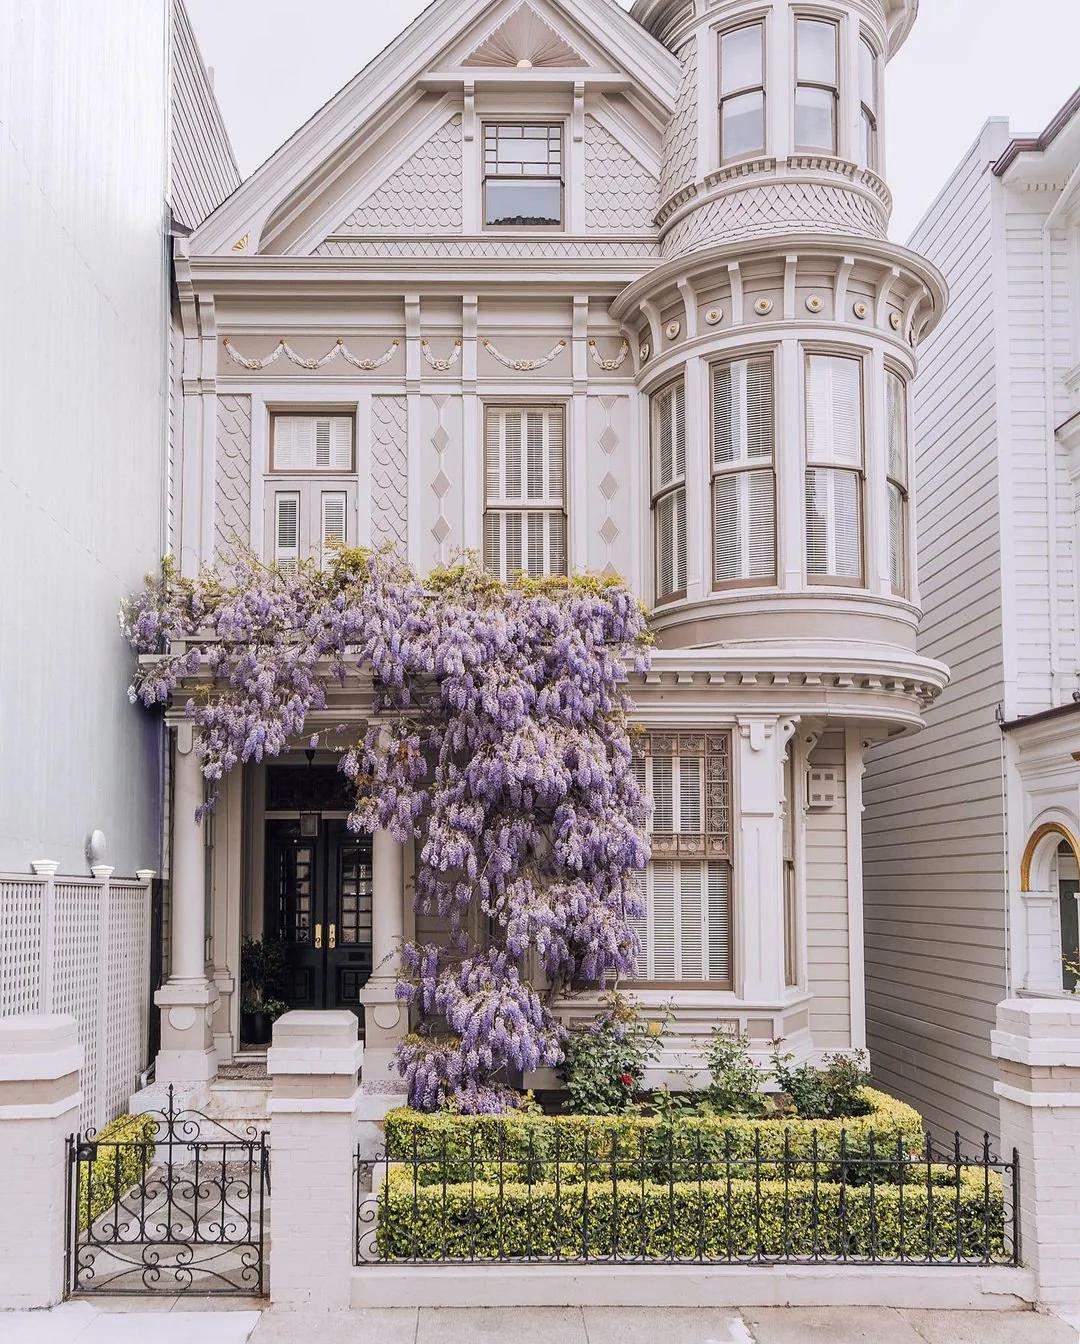 Victorian Townhouse Adorned With Wisteria Blossoms In San Francisco, By Zorymory